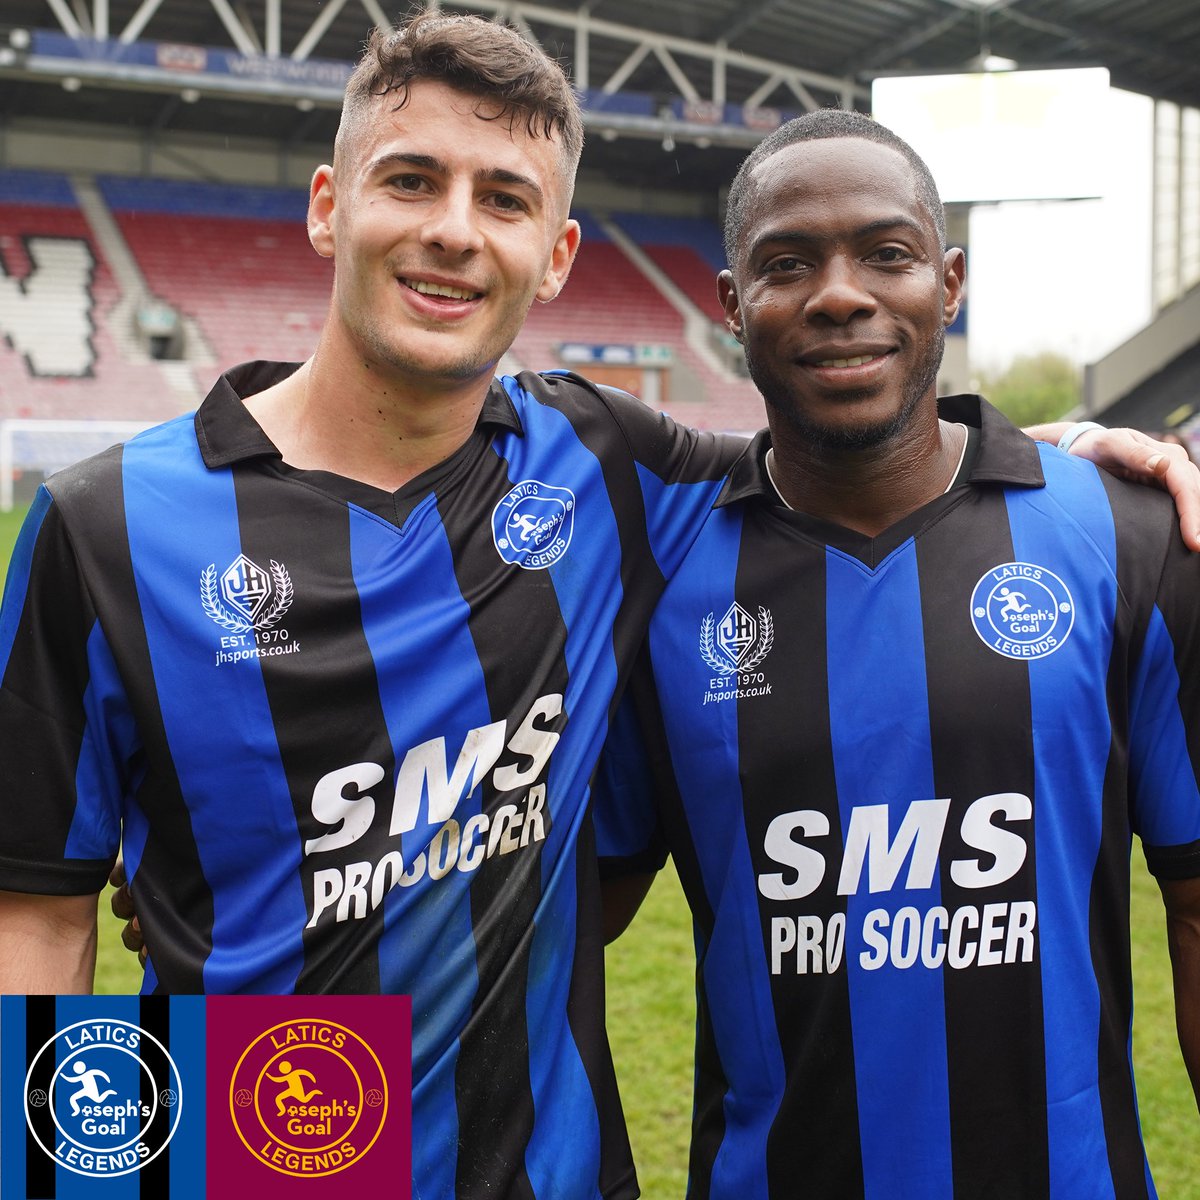 An outstanding event, supporting @JosephsGoal 👏 Thank you to the supporters, players, charity volunteers & sponsors for all playing their part in a special day 💙 #wafc 🔵⚪️